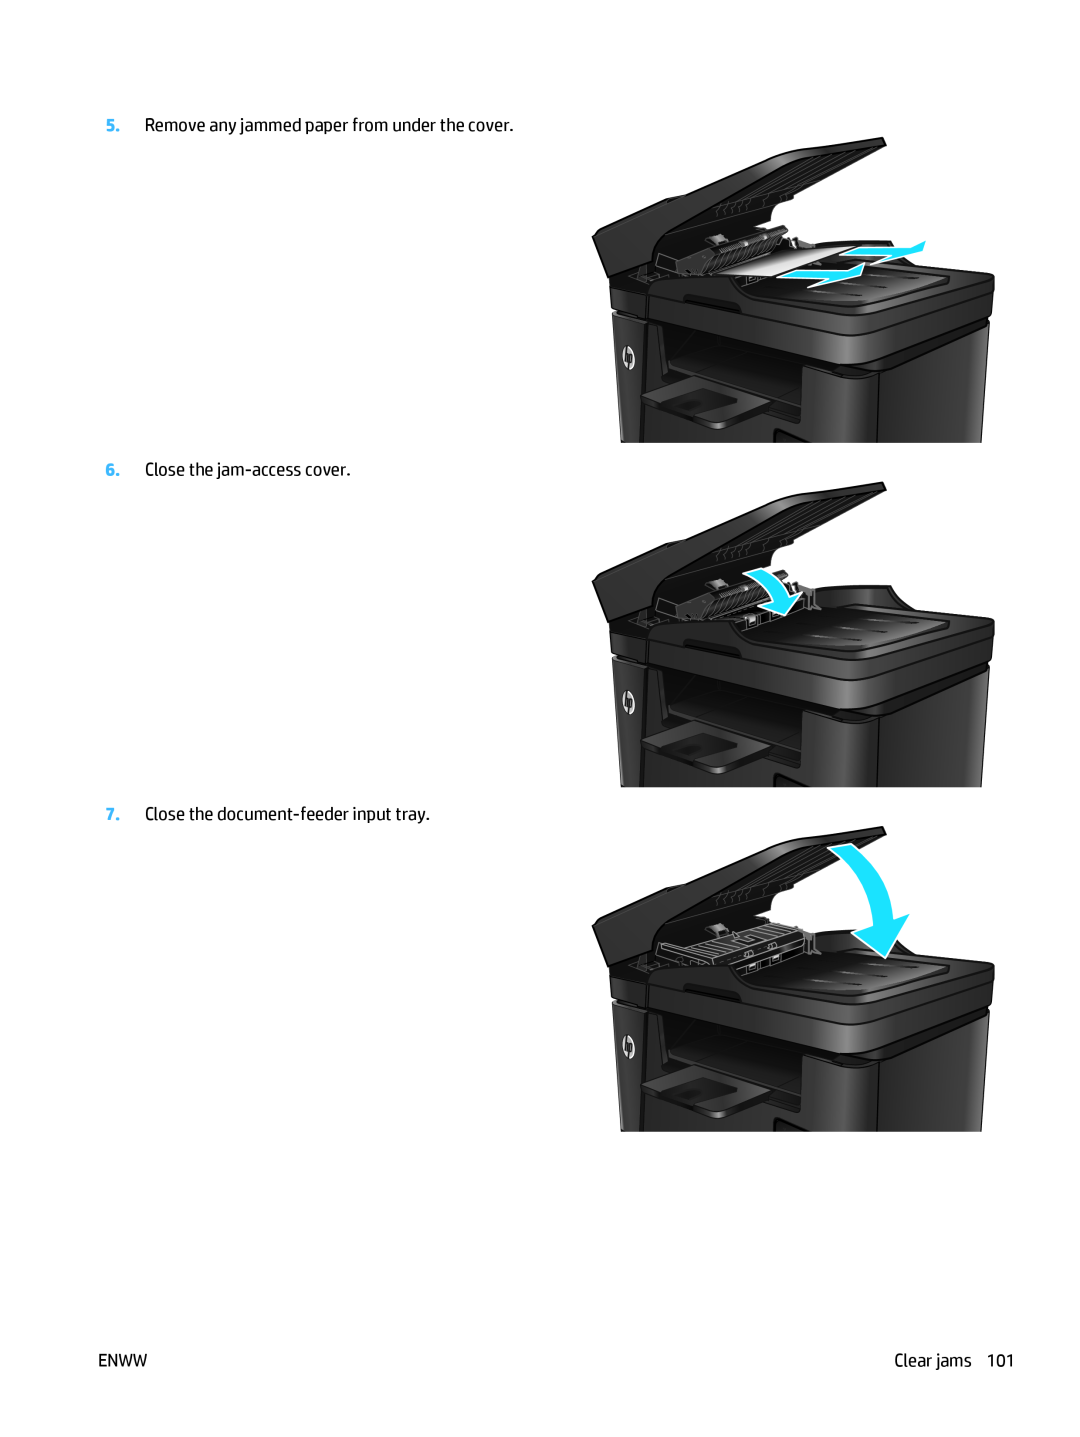 HP MFP M225dw, MFP M225dn manual Remove any jammed paper from under the cover, Enww, Clear jams 